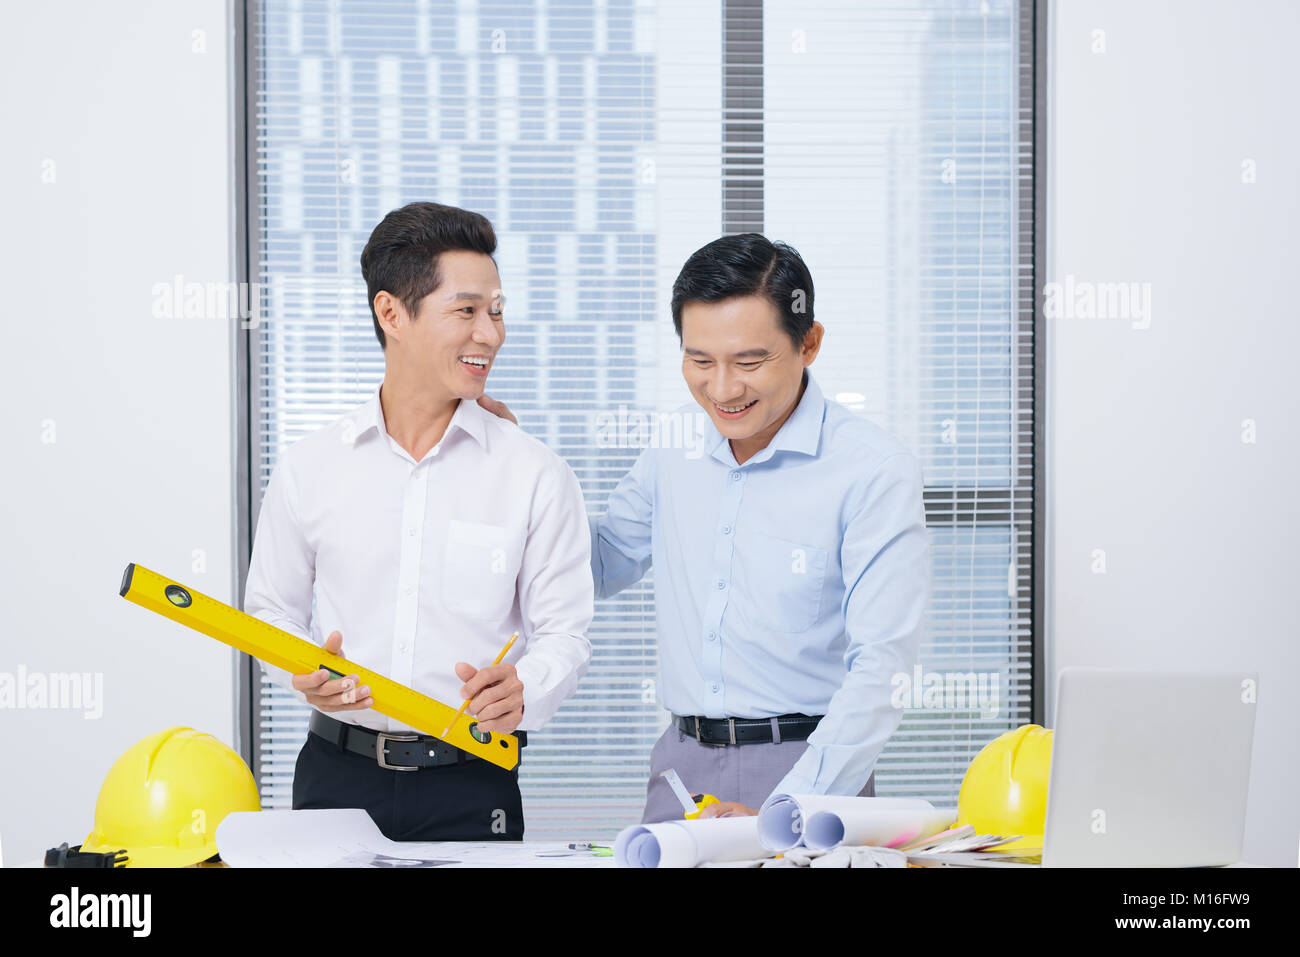 Male coworkers discussing ideas  about project in office, architectural concept Stock Photo